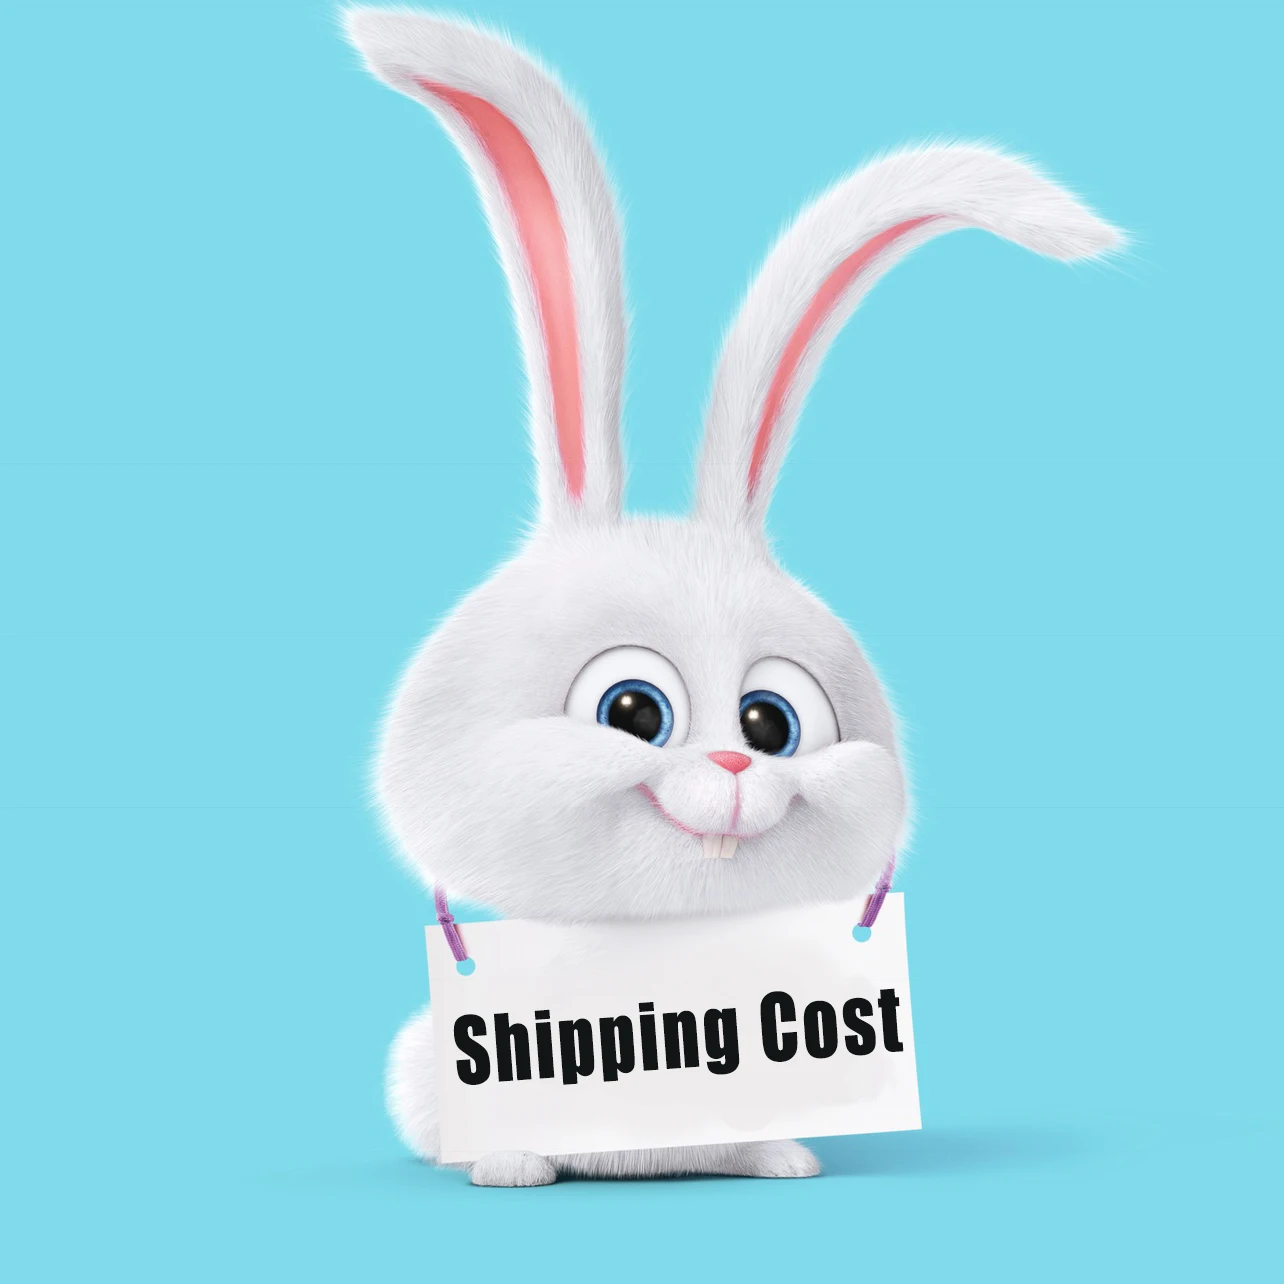 

Extra Shipping Fee Link $0.49